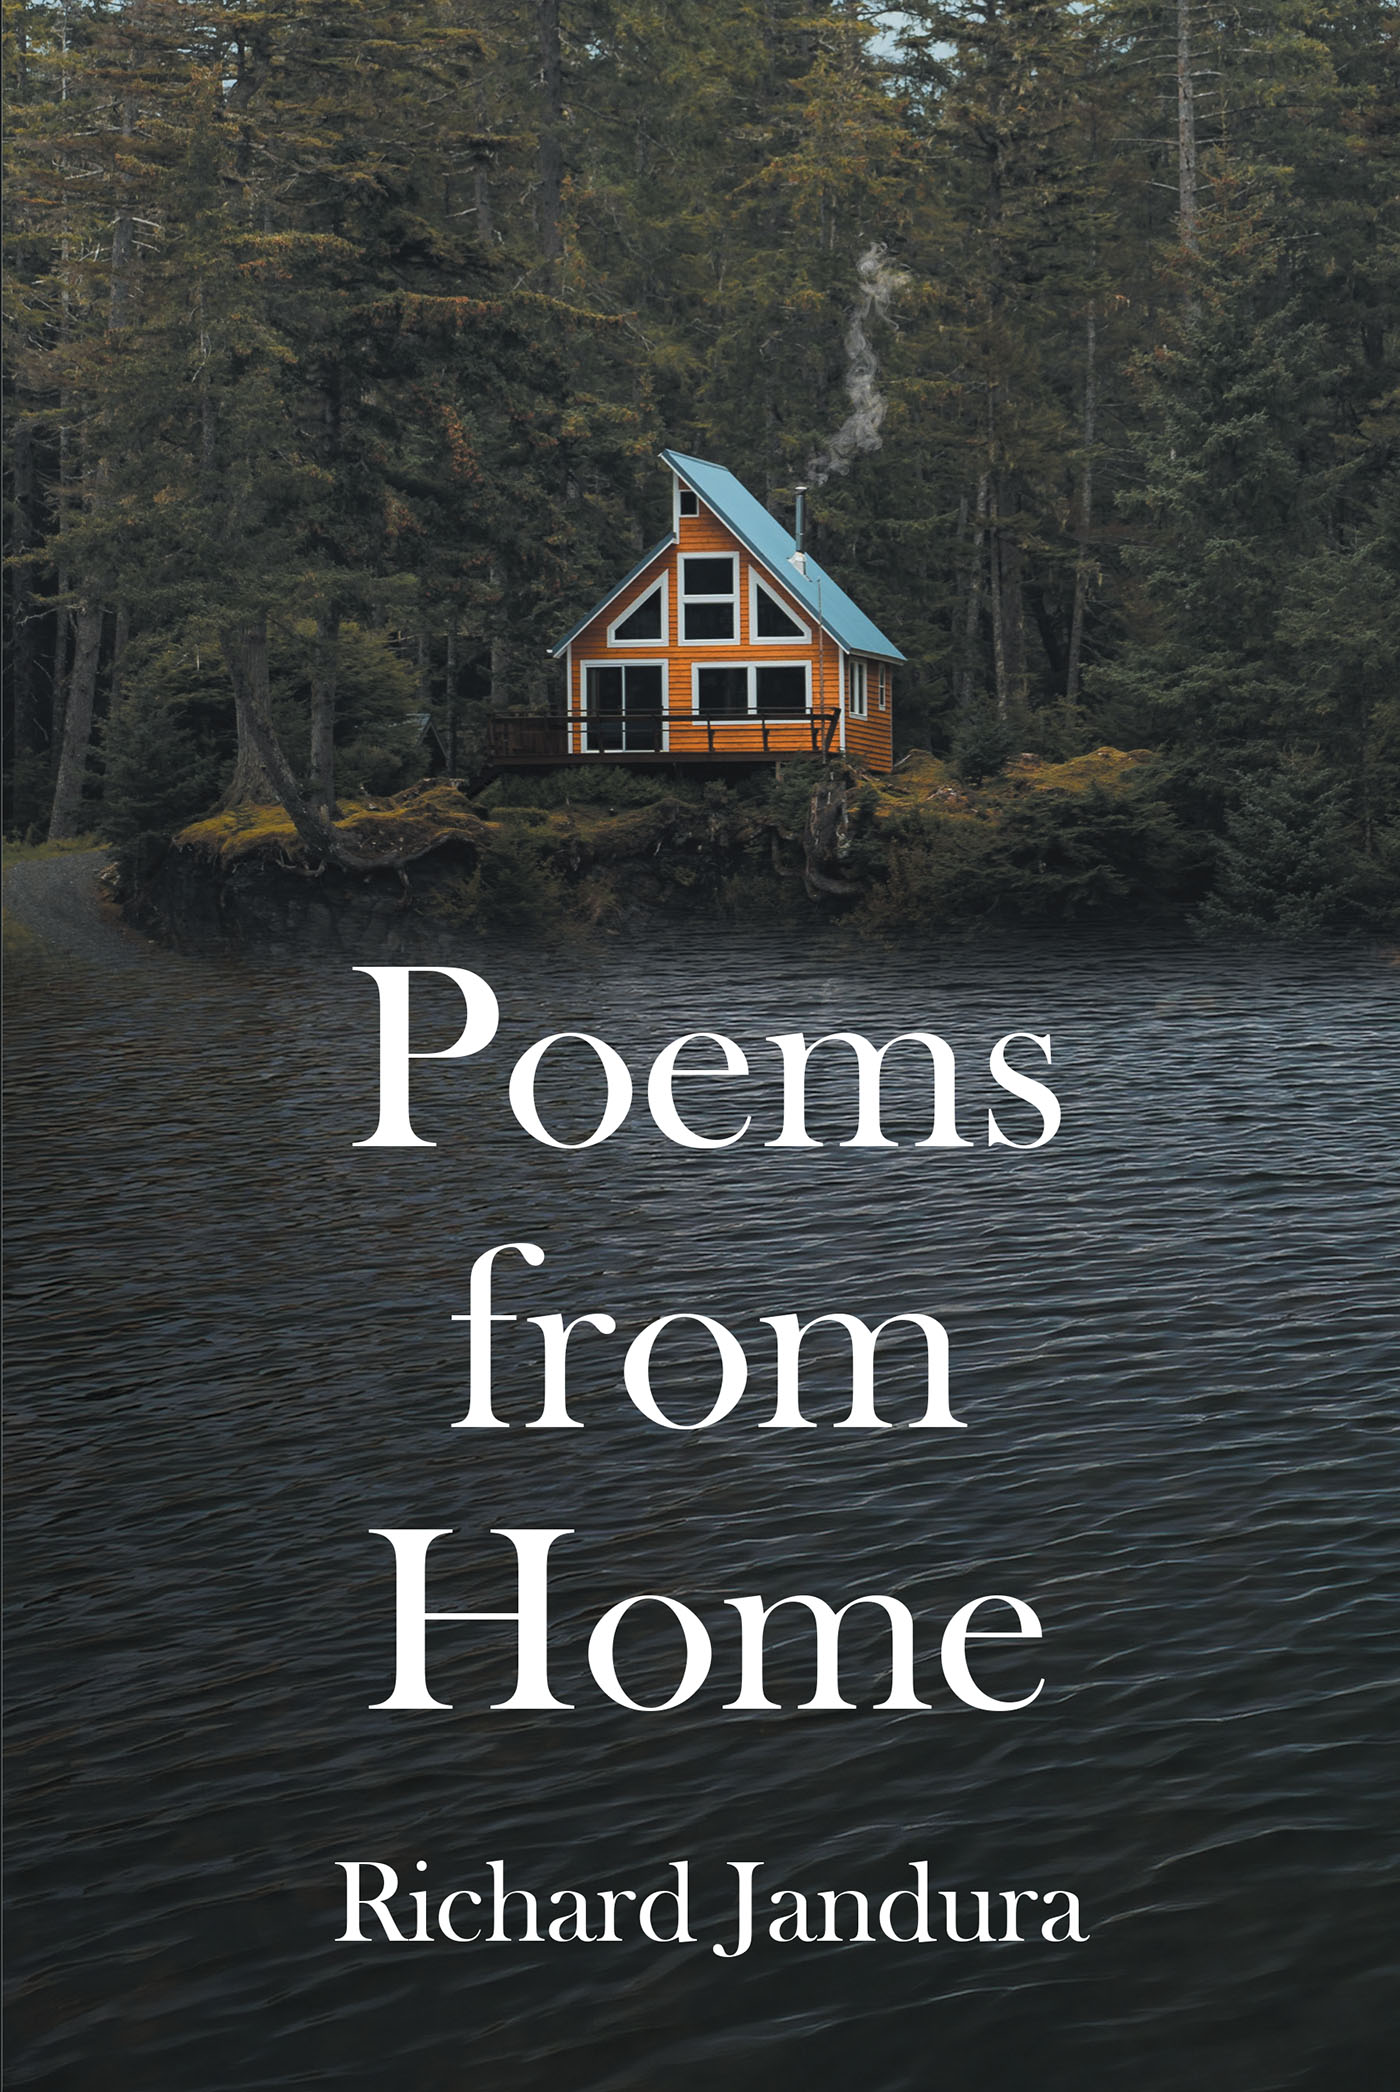 Author Richard Jandura’s New Book, "Poems from Home," is a Collection of More Than 200 Poems That Will Harken Readers Back to Simpler Times